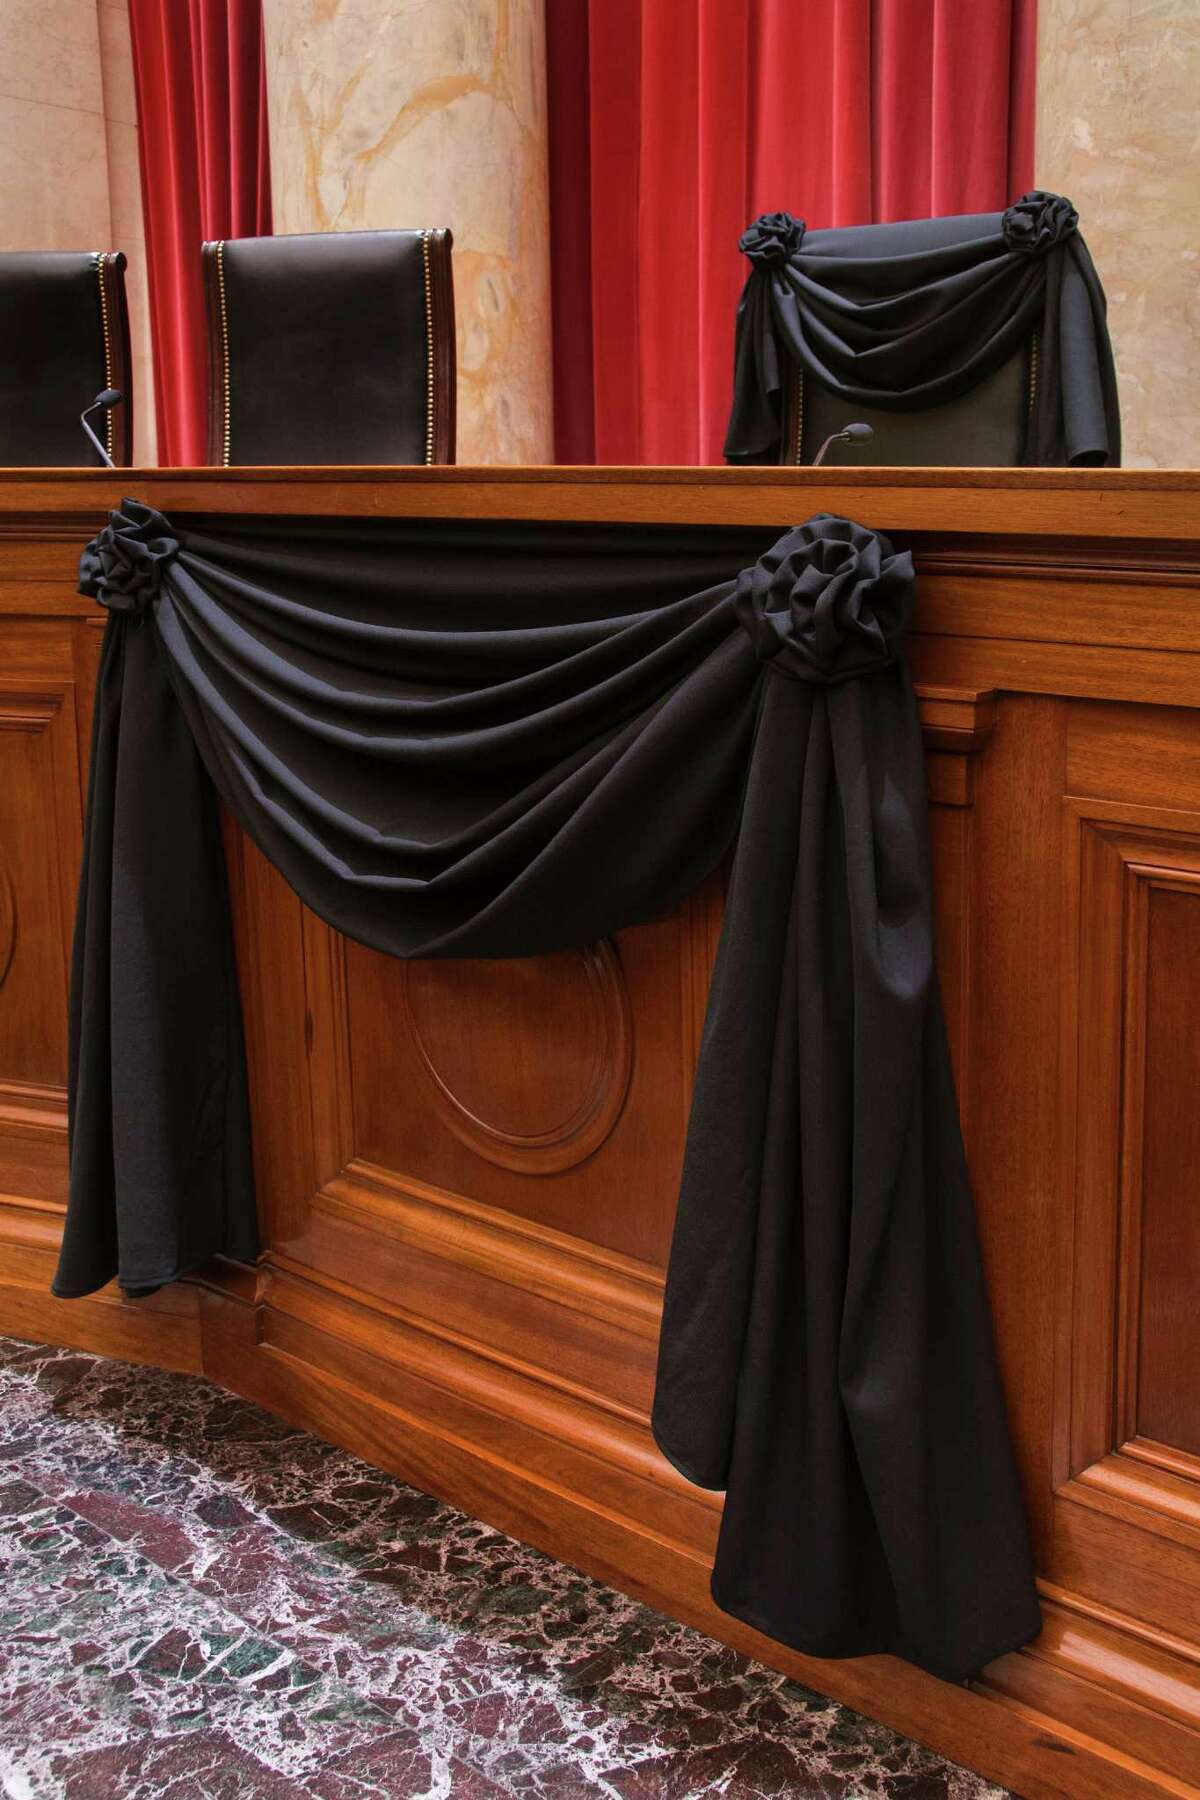 This photo obtained February 16, 2016 courtesy of the US Supreme Court shows Supreme Court Associate Justice Antonin Scalias Bench Chair and the Bench in front of his seat draped in black following his death on February 13, 2016. The sudden death of Justice Antonin Scalia, a towering conservative icon on the US Supreme Court, has set off an epic election-year battle over his successor that will shape American life far into the future.Scalia died of an apparent heart attack at age 79, leaving what had been a conservative-dominated court evenly divided in a year of blockbuster cases -- on abortion, affirmative action, immigration and President Barack Obama's health care law. / AFP / Supreme Court of the United States / Supreme Court of the United Stat / RESTRICTED TO EDITORIAL USE - MANDATORY CREDIT "AFP PHOTO / US SUPREME COURT" - NO MARKETING NO ADVERTISING CAMPAIGNS - DISTRIBUTED AS A SERVICE TO CLIENTS SUPREME COURT OF THE UNITED STAT/AFP/Getty Images